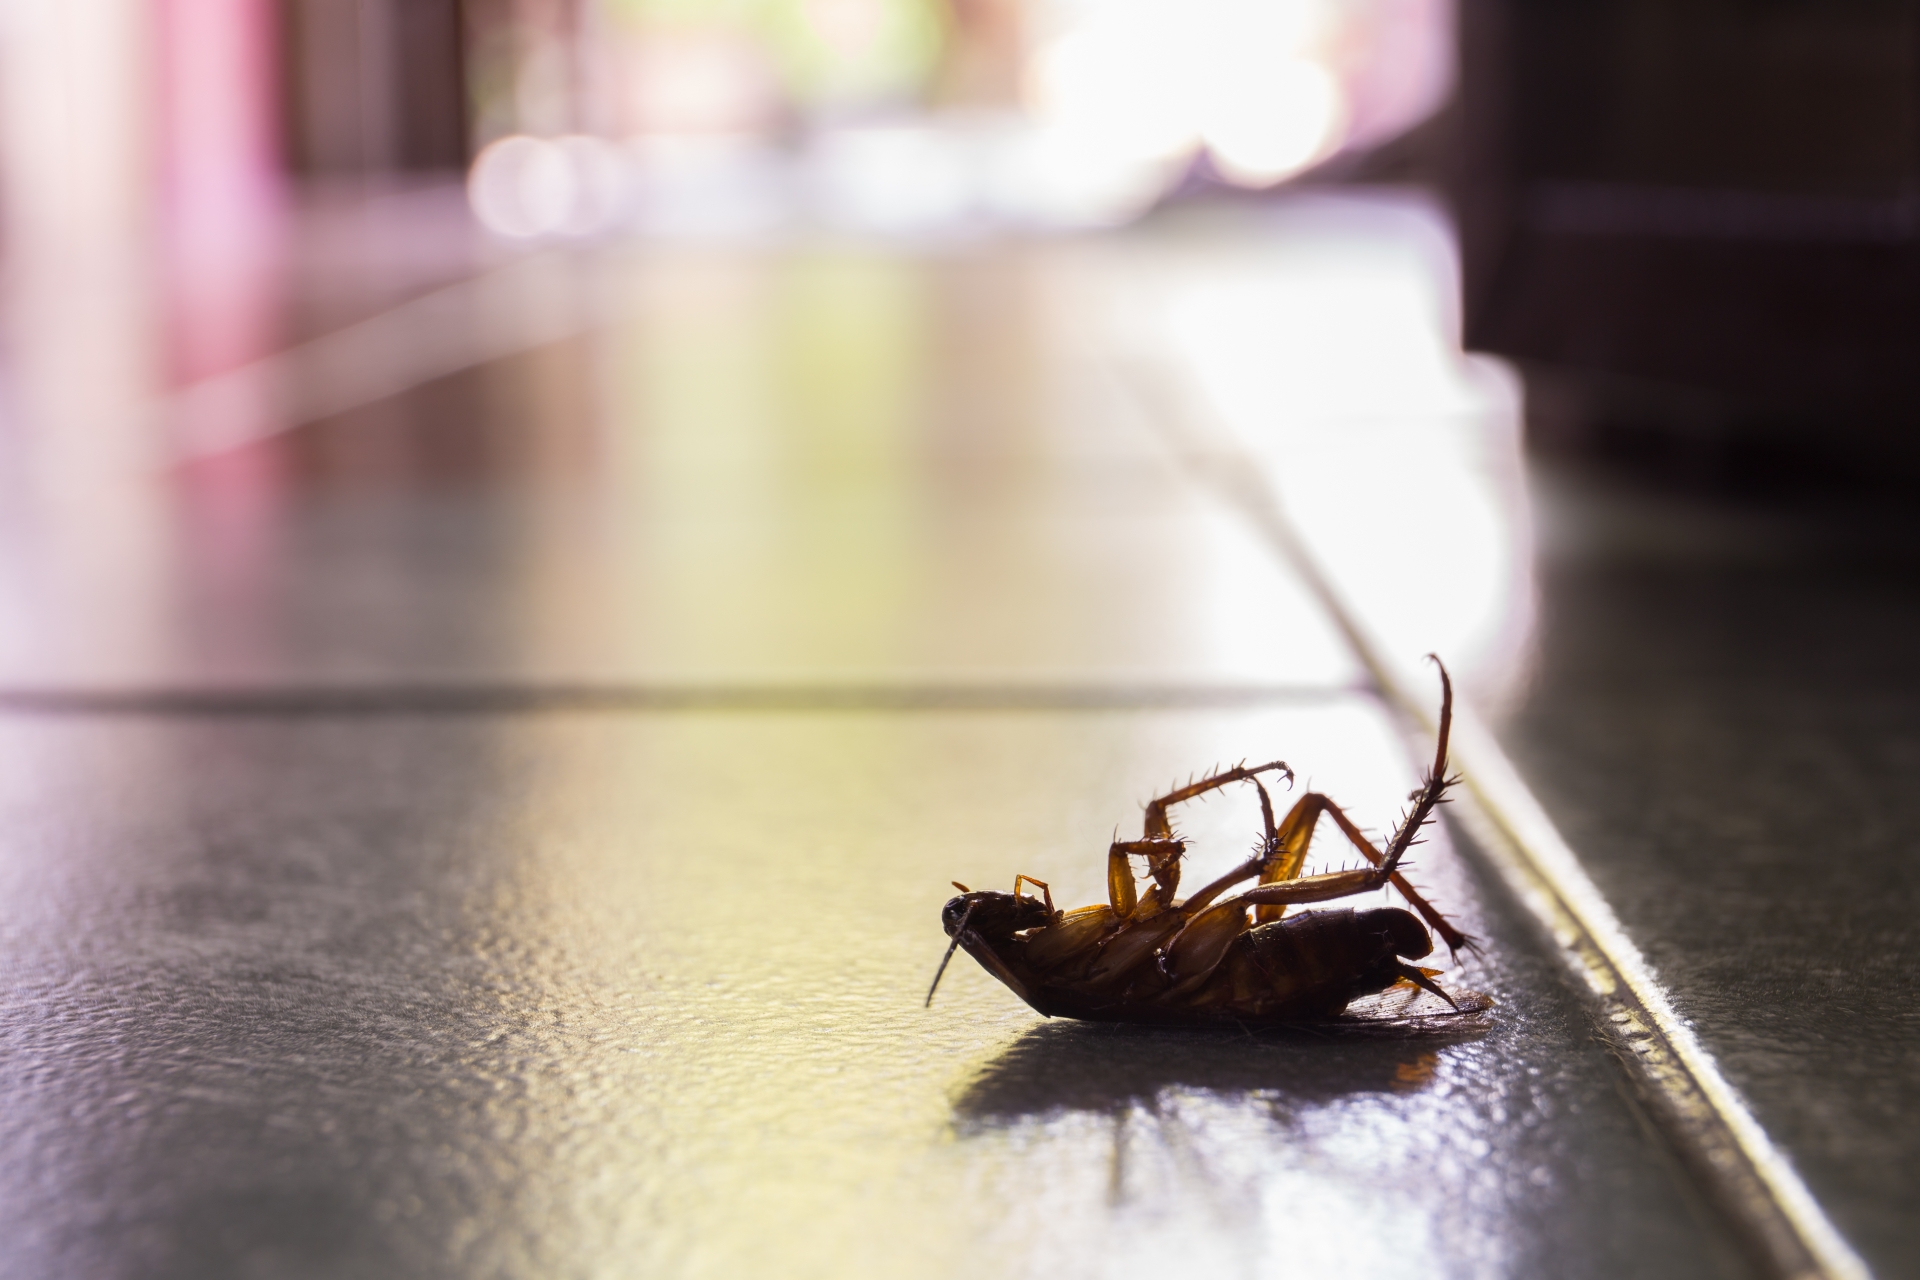 Cockroach Control, Pest Control in Hanwell, W7. Call Now 020 8166 9746